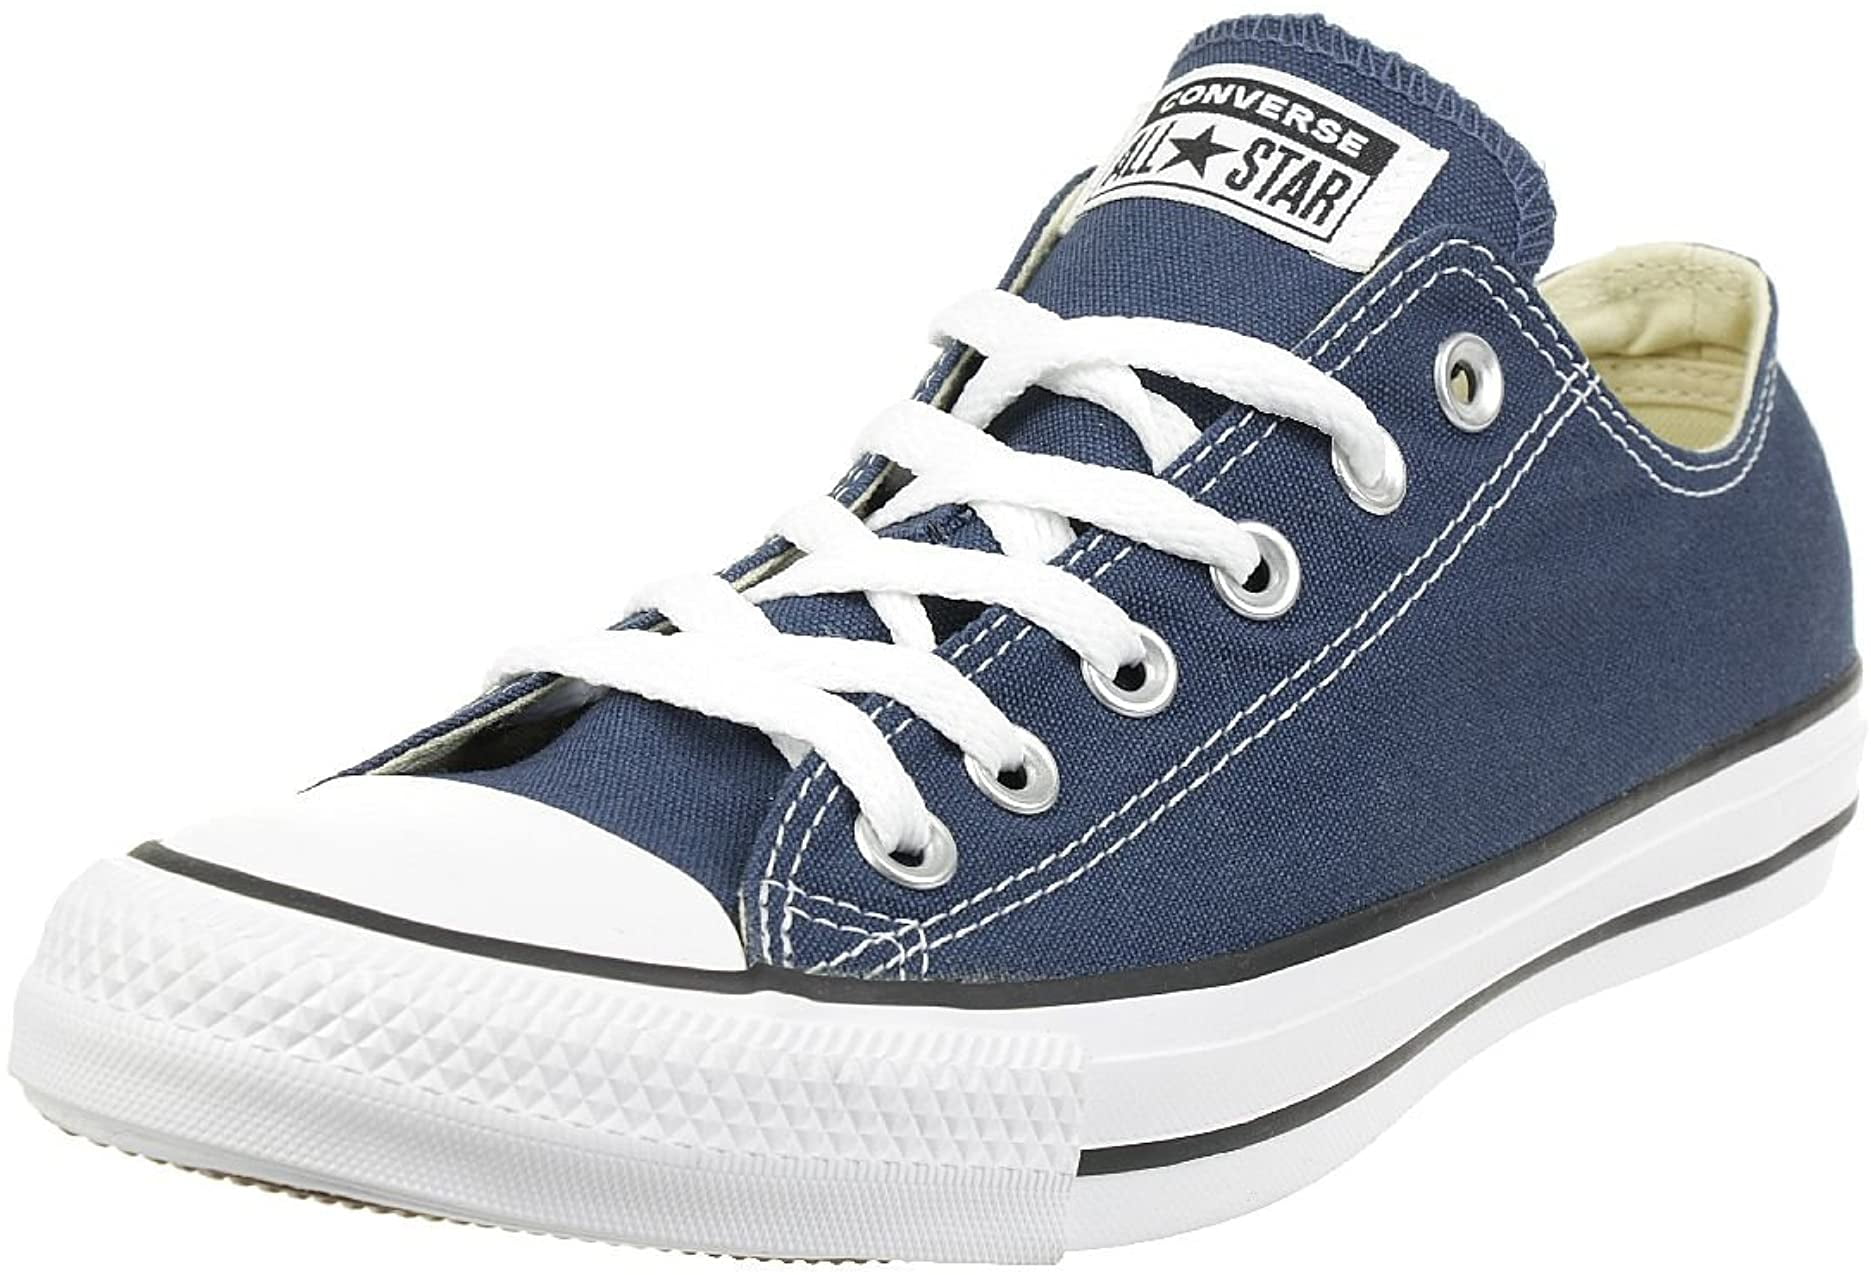 Converse Chuck Taylor All Star Low Top Ox Unisex Sneakers - - 4.5M/6.5W - Walmart.com